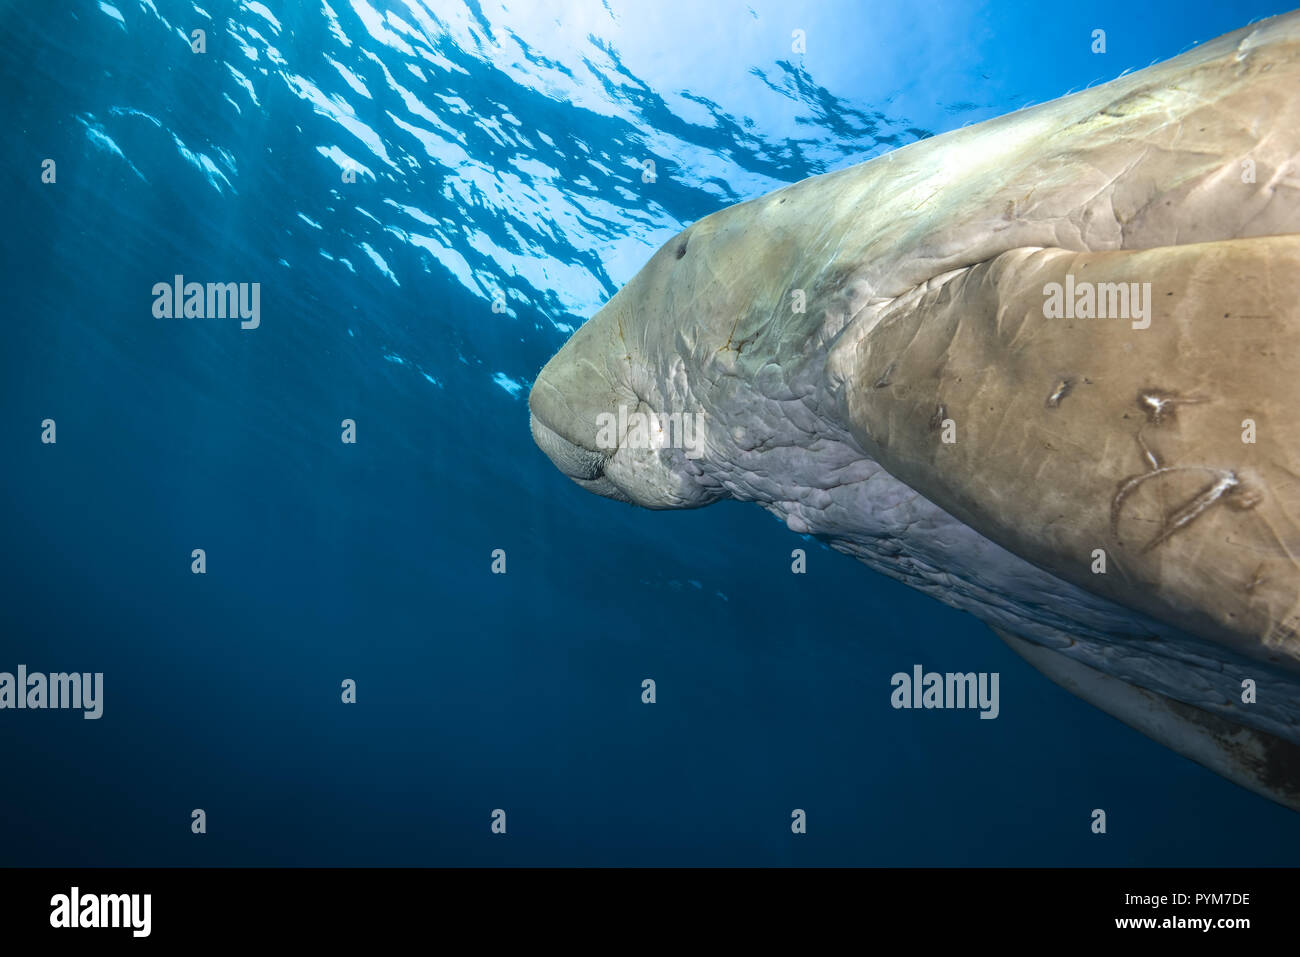 Portrait of  Dugong or Sea Cow, Dugong dugon swim in the blue water under surface Stock Photo